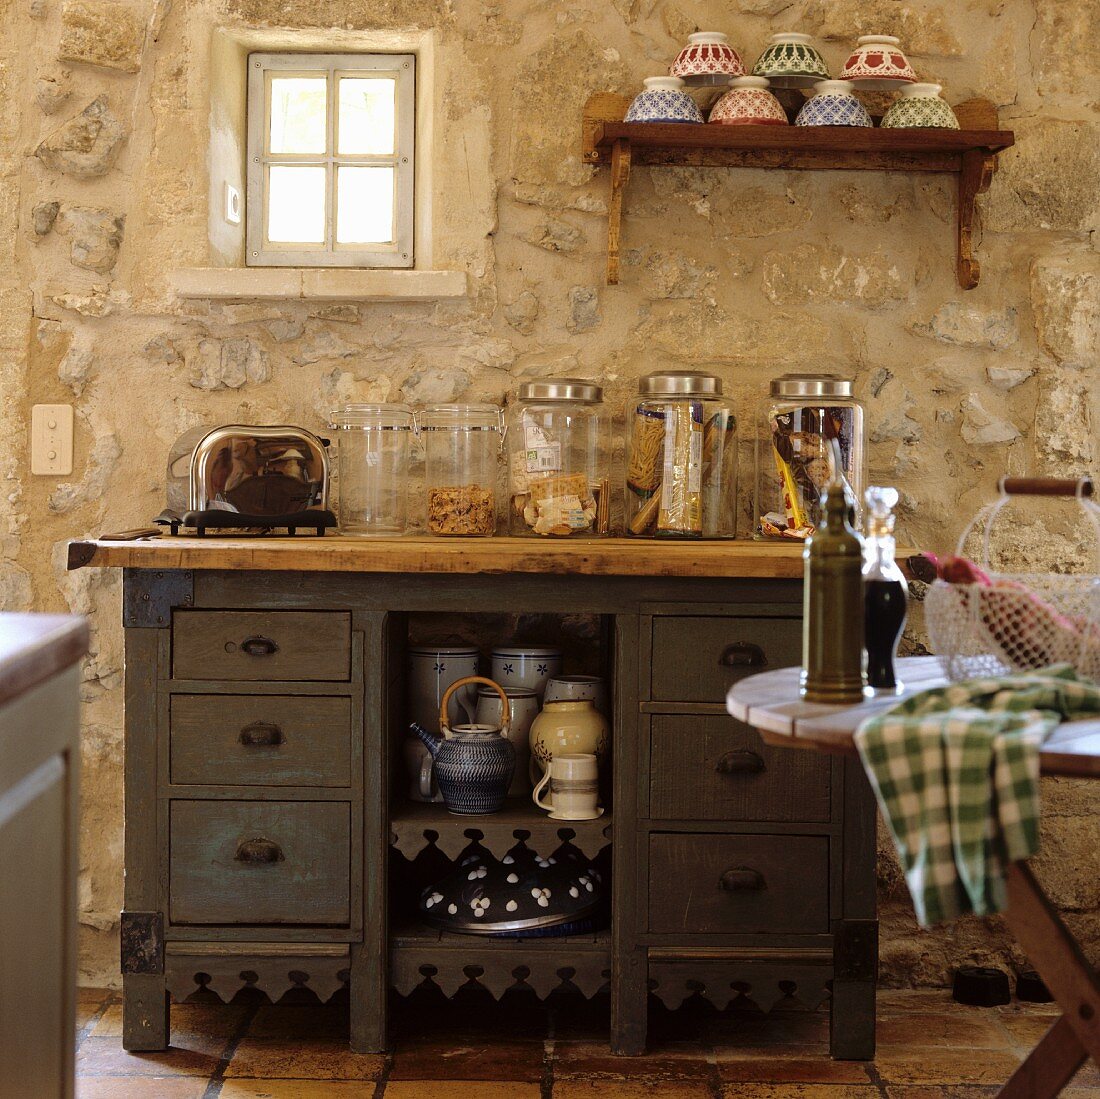 Storage jars on an old kitchen drawer unit in front of a rustic, natural stone wall